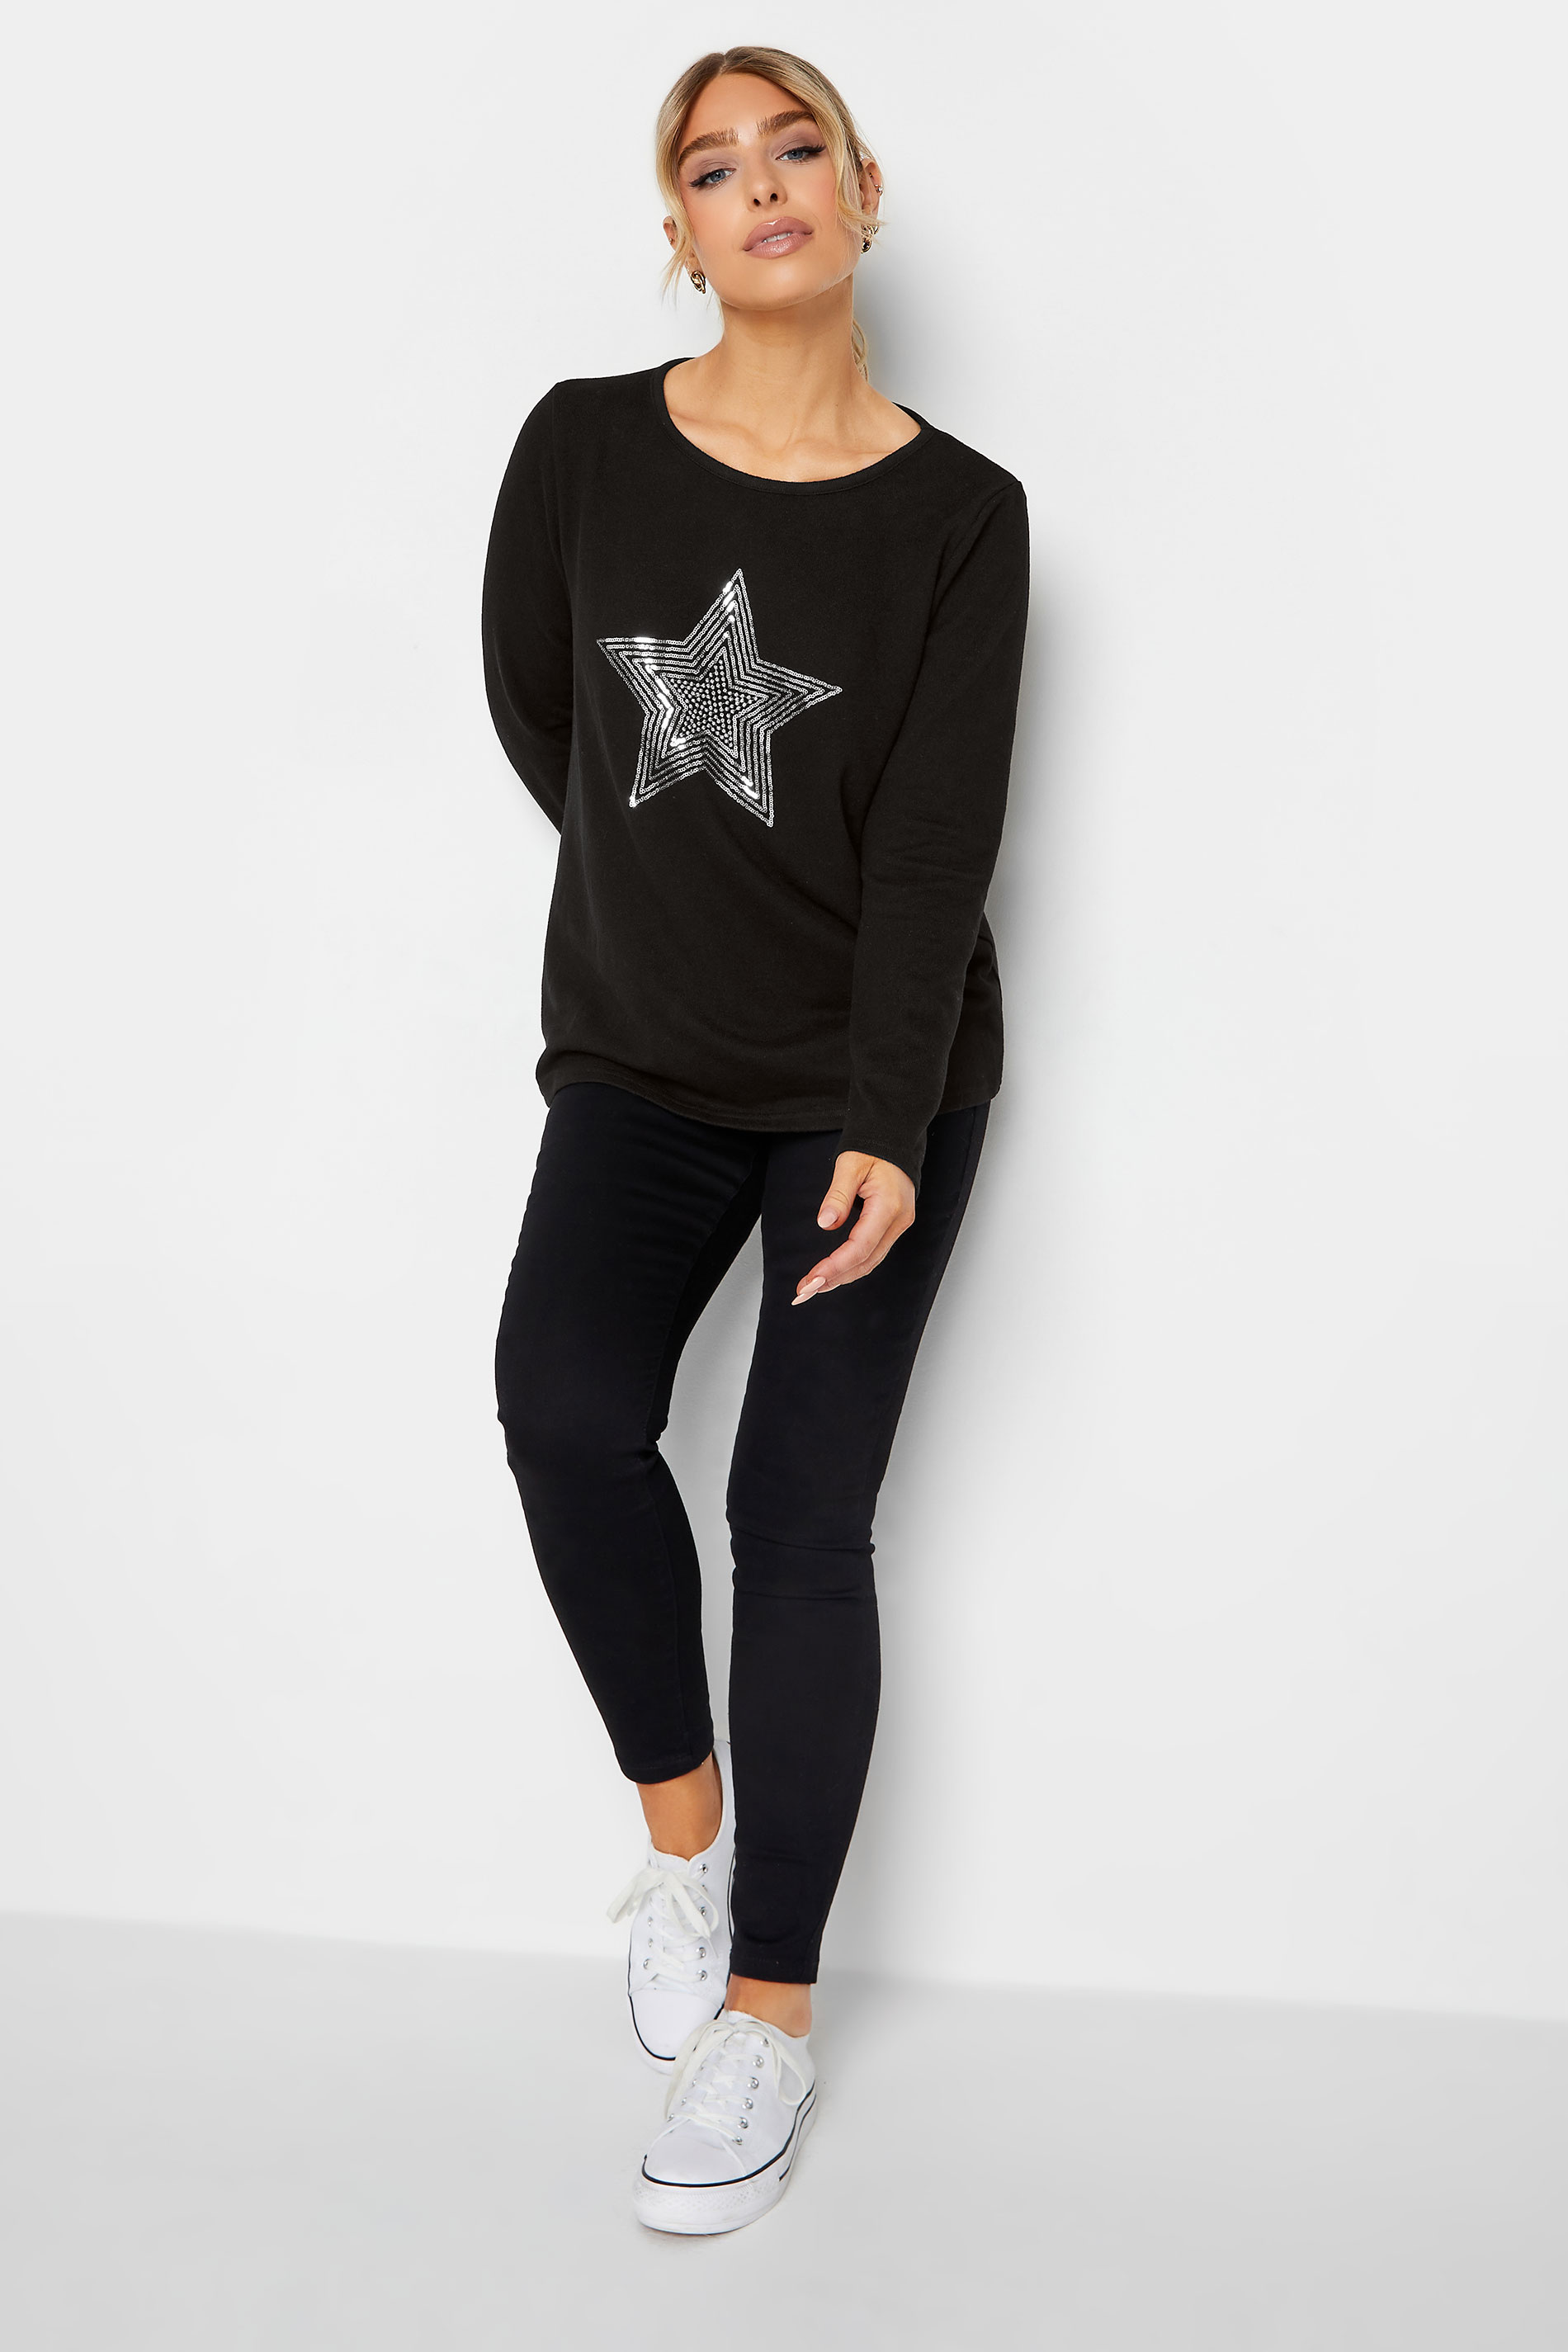 M&Co Black Sequin Star Soft Touch Jumper | M&Co 2